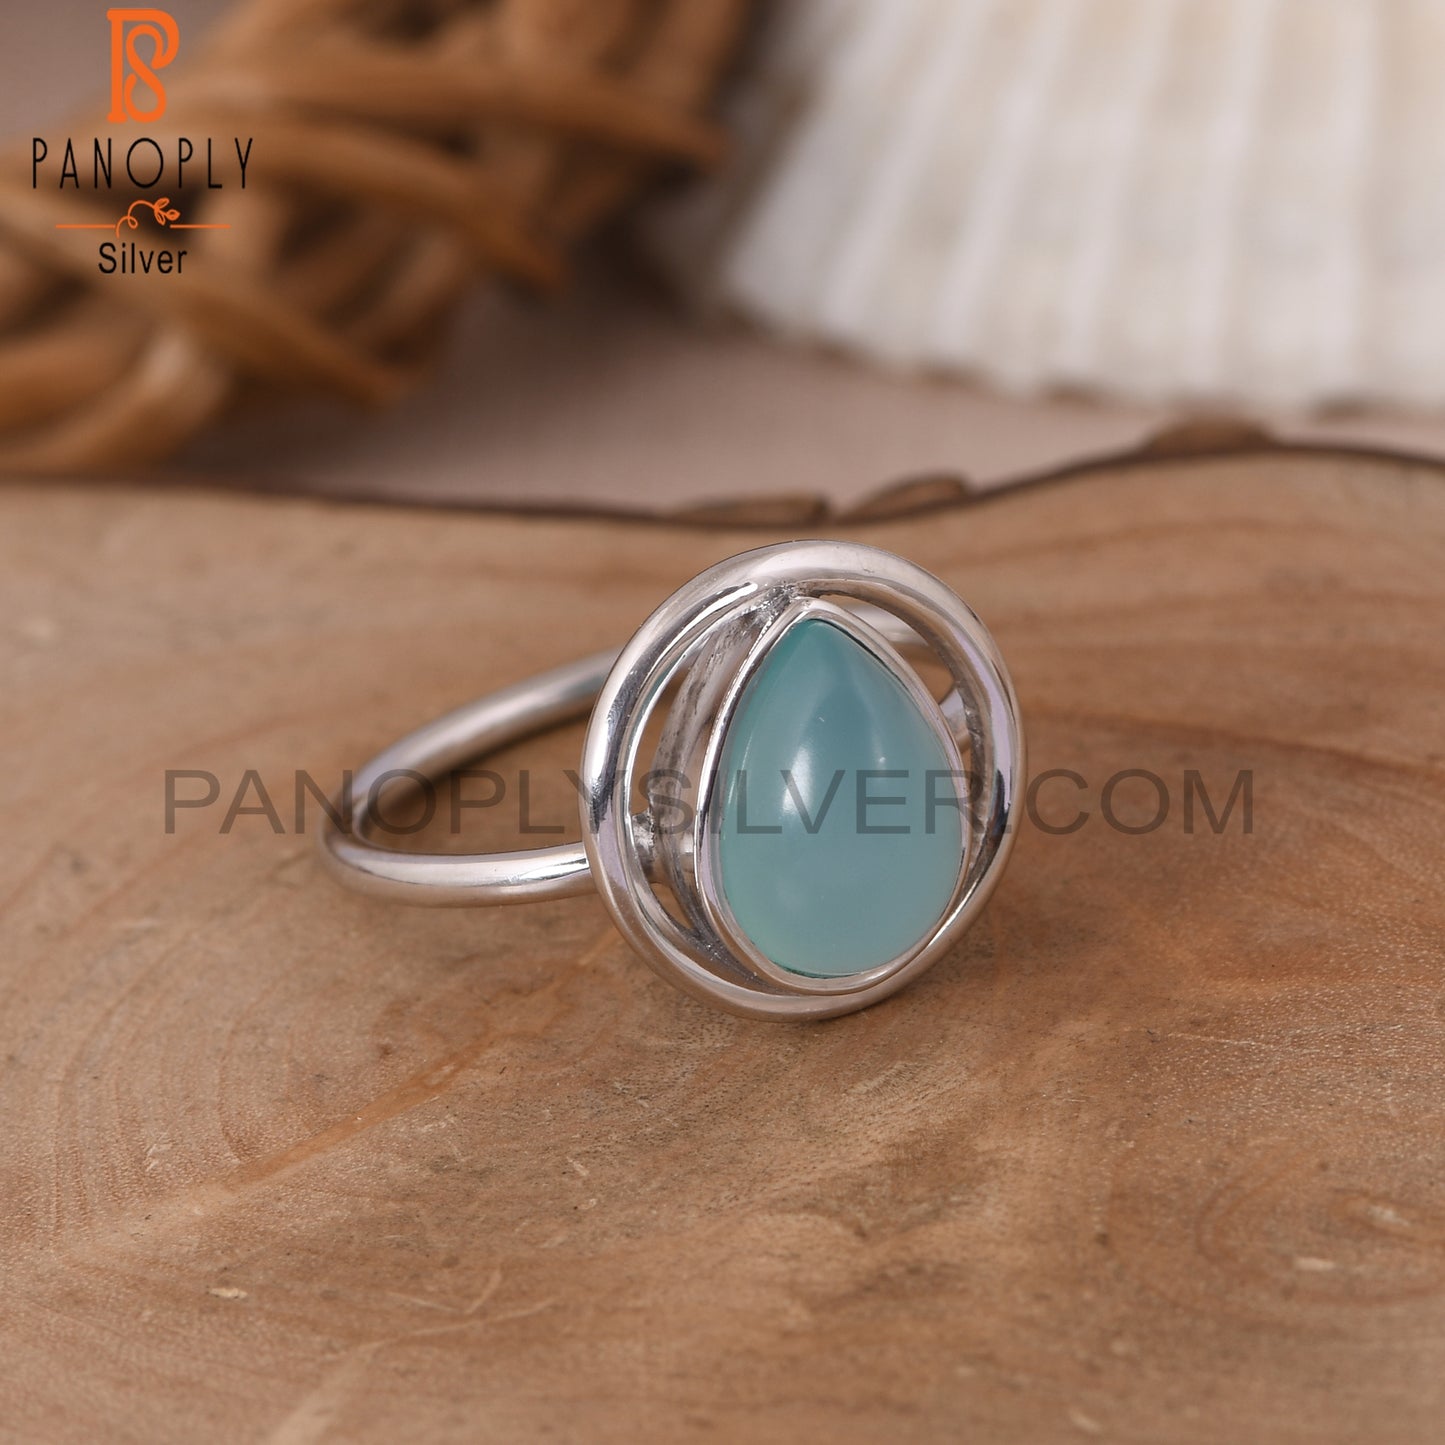 Blue Chalcedony 925 Stamp Pear Shape Engagement Ring